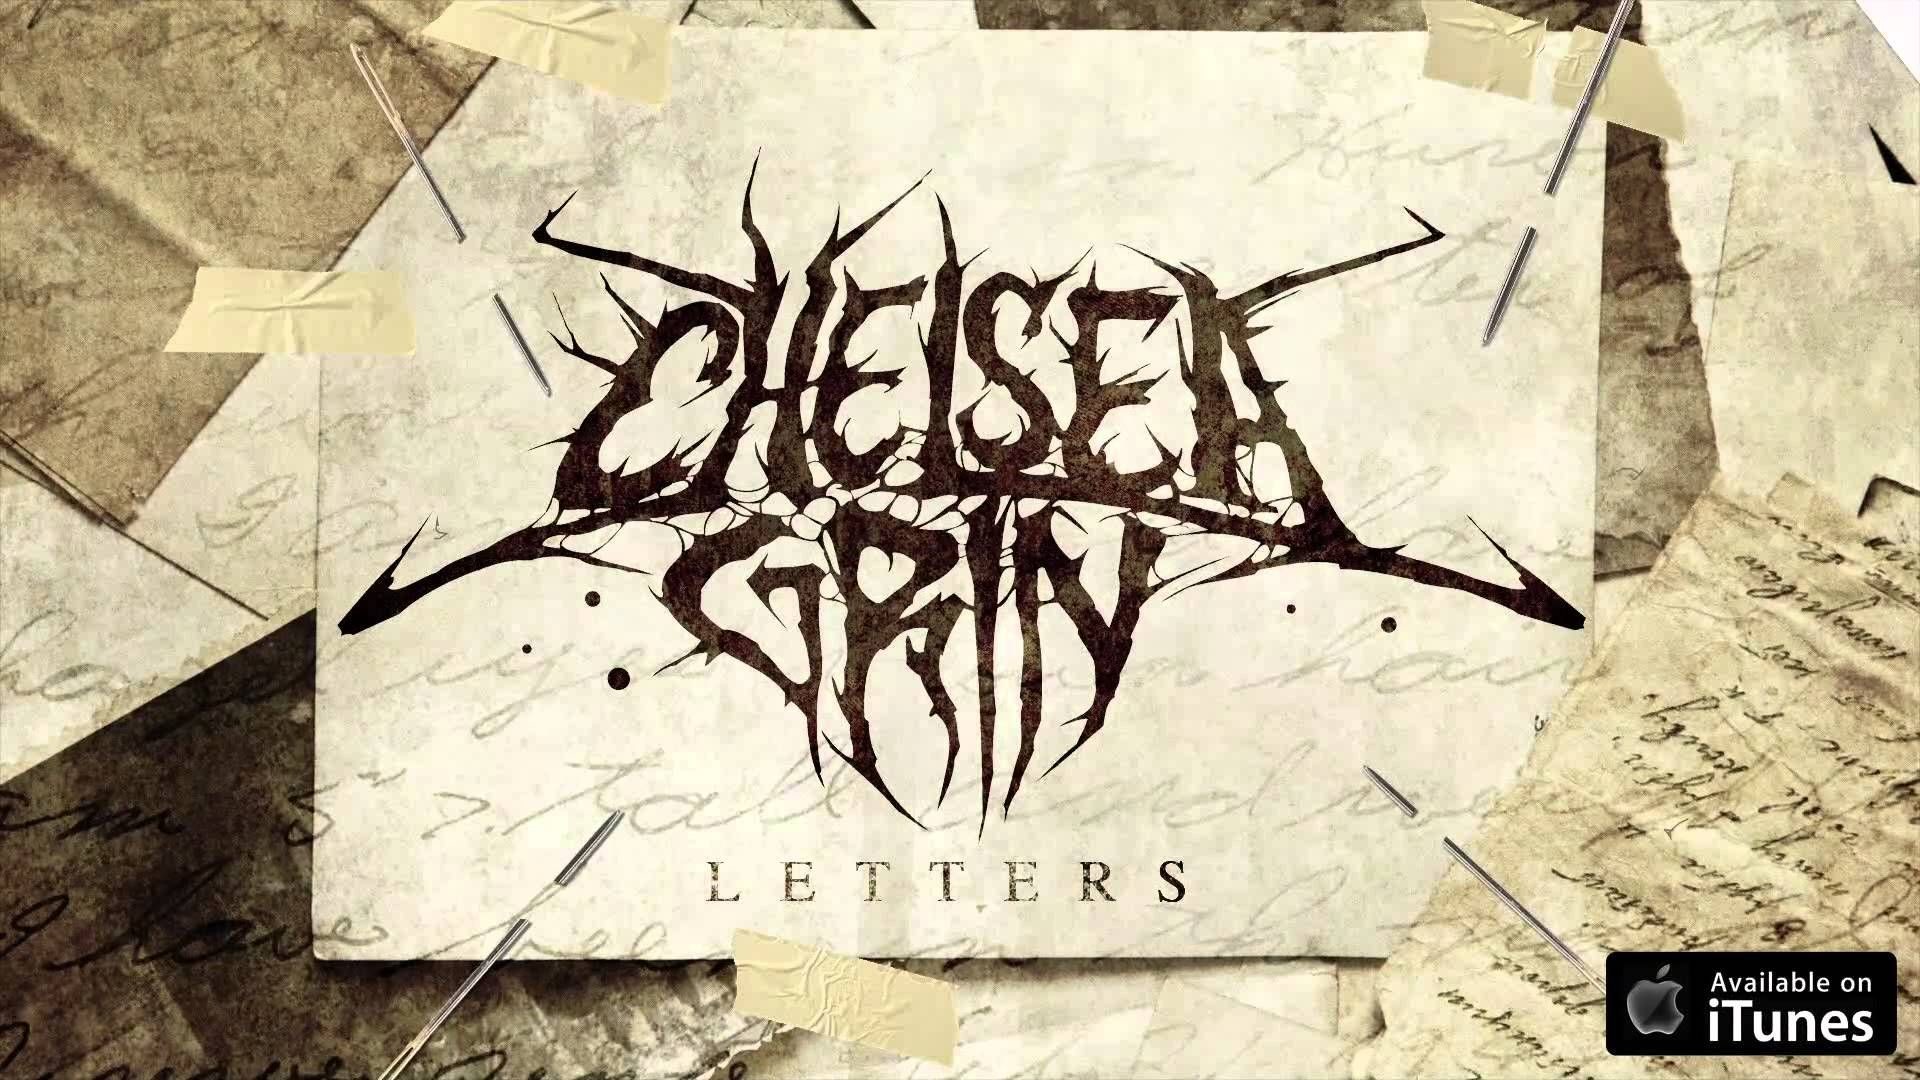 1920x1080 Chelsea Grin - Letters *NEW SONG* Metal Mp3, Lettering, Hard Rock,